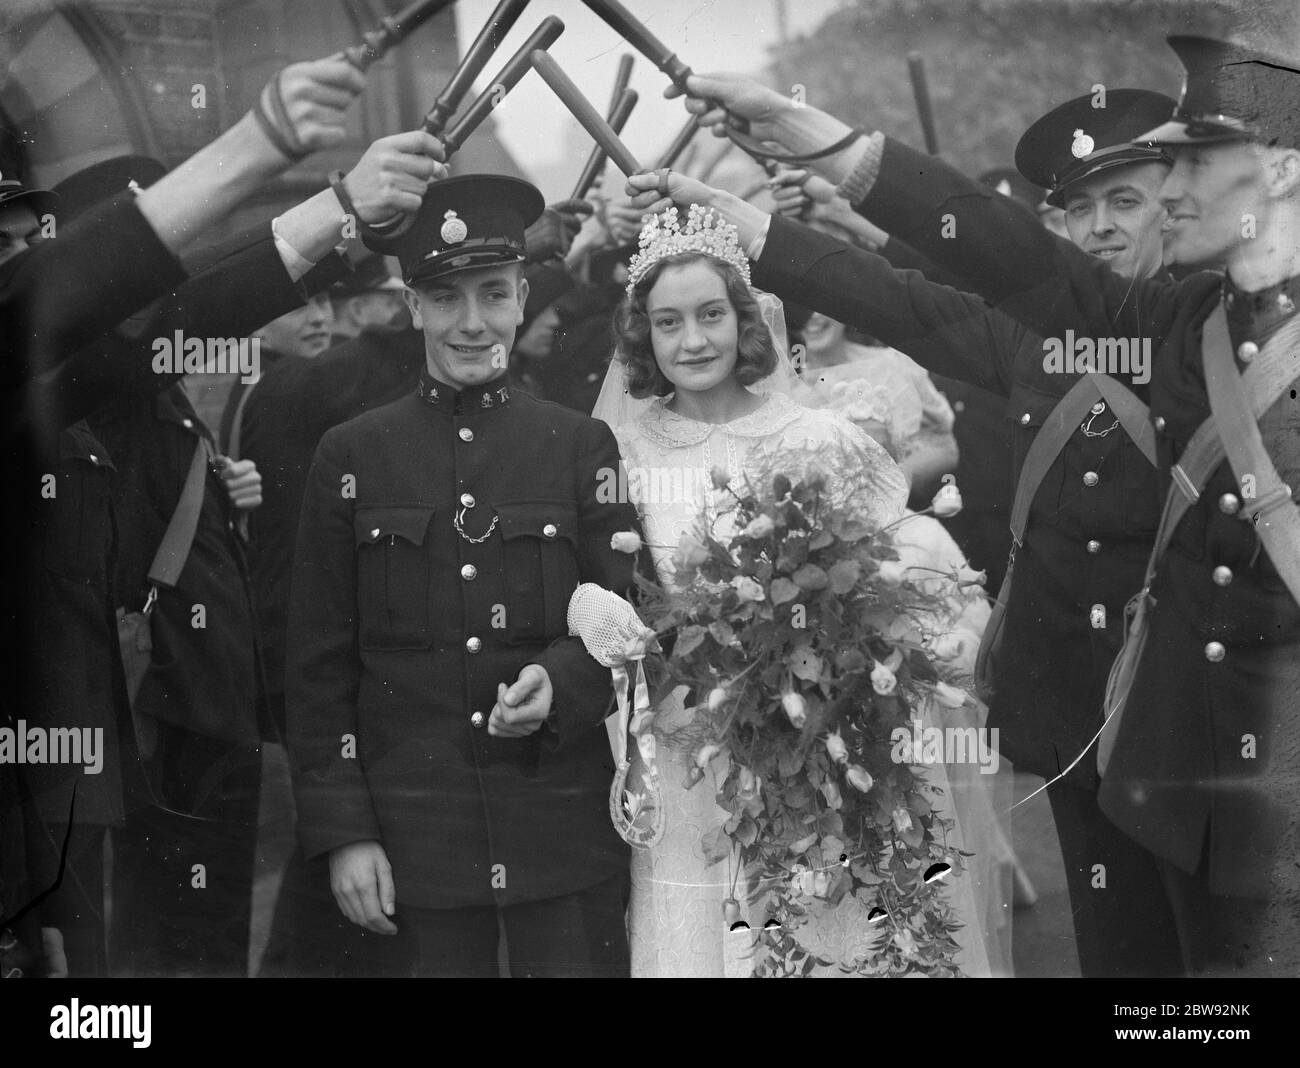 The wedding of special constable Mr R L King and Miss Winifred Latham in Plumstead , London . The bride and groom walk out through a guard of honour . 1939 Stock Photo